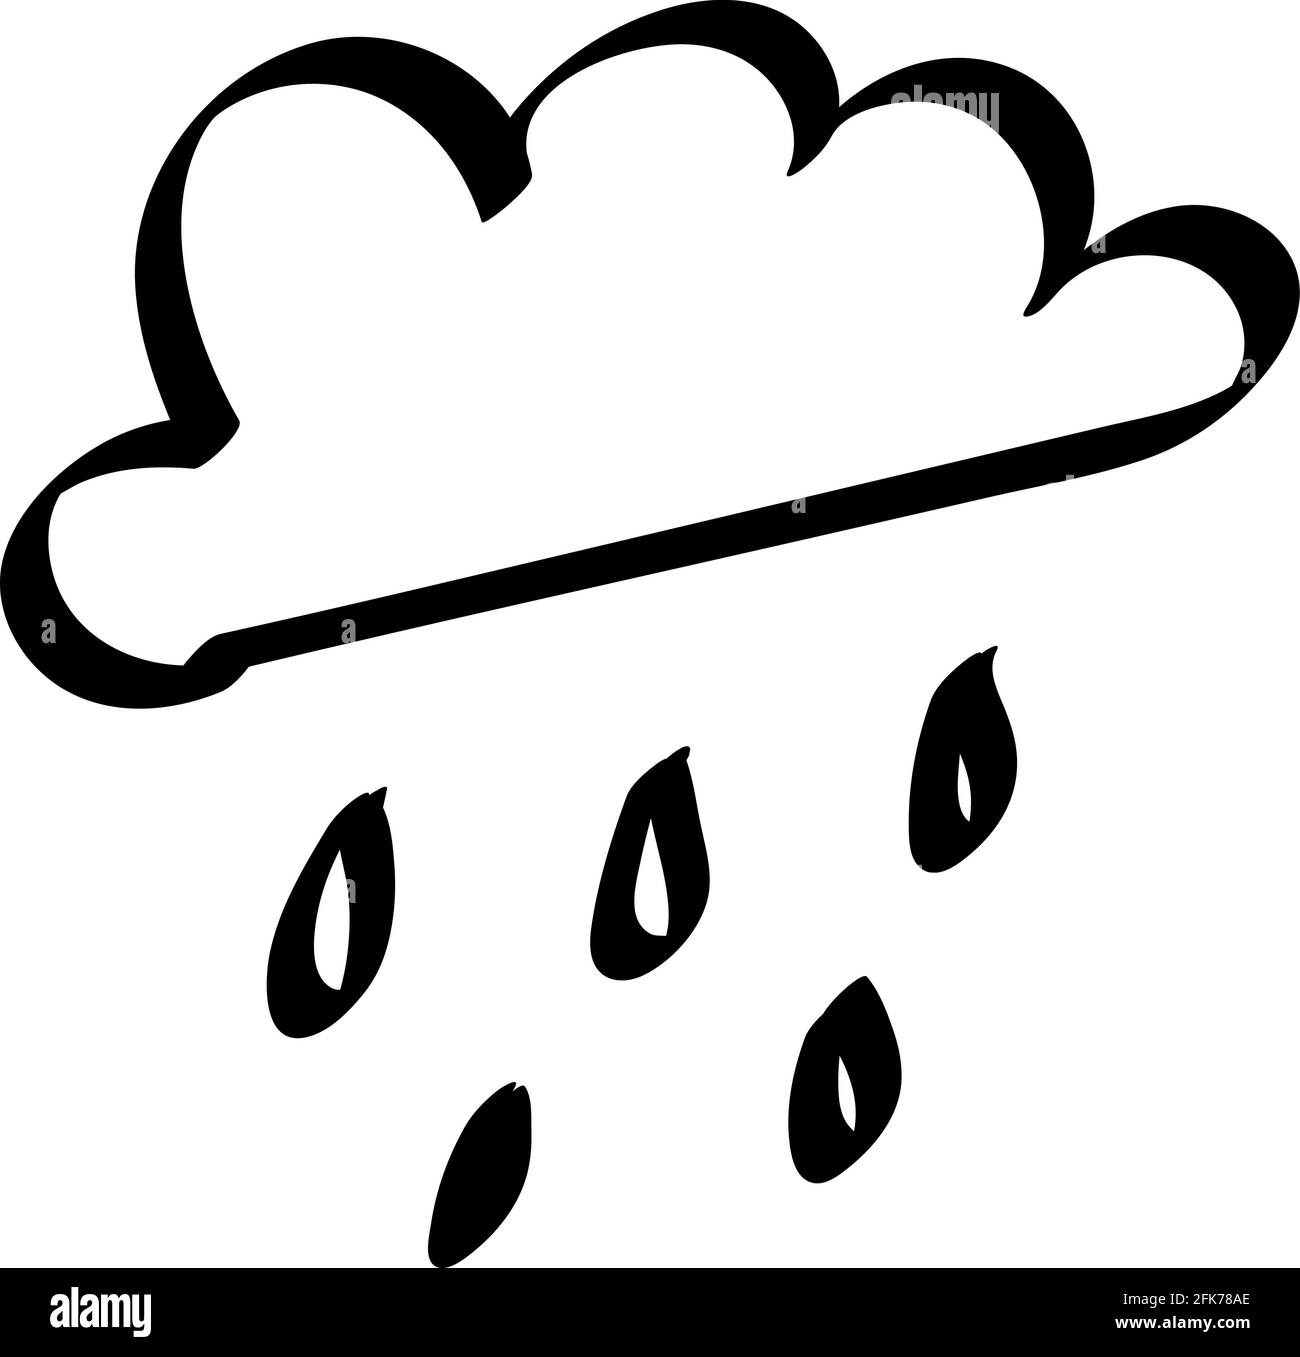 cloud with raindrops icon hand drawing doodle illustration illustration. weather element. Stock Vector